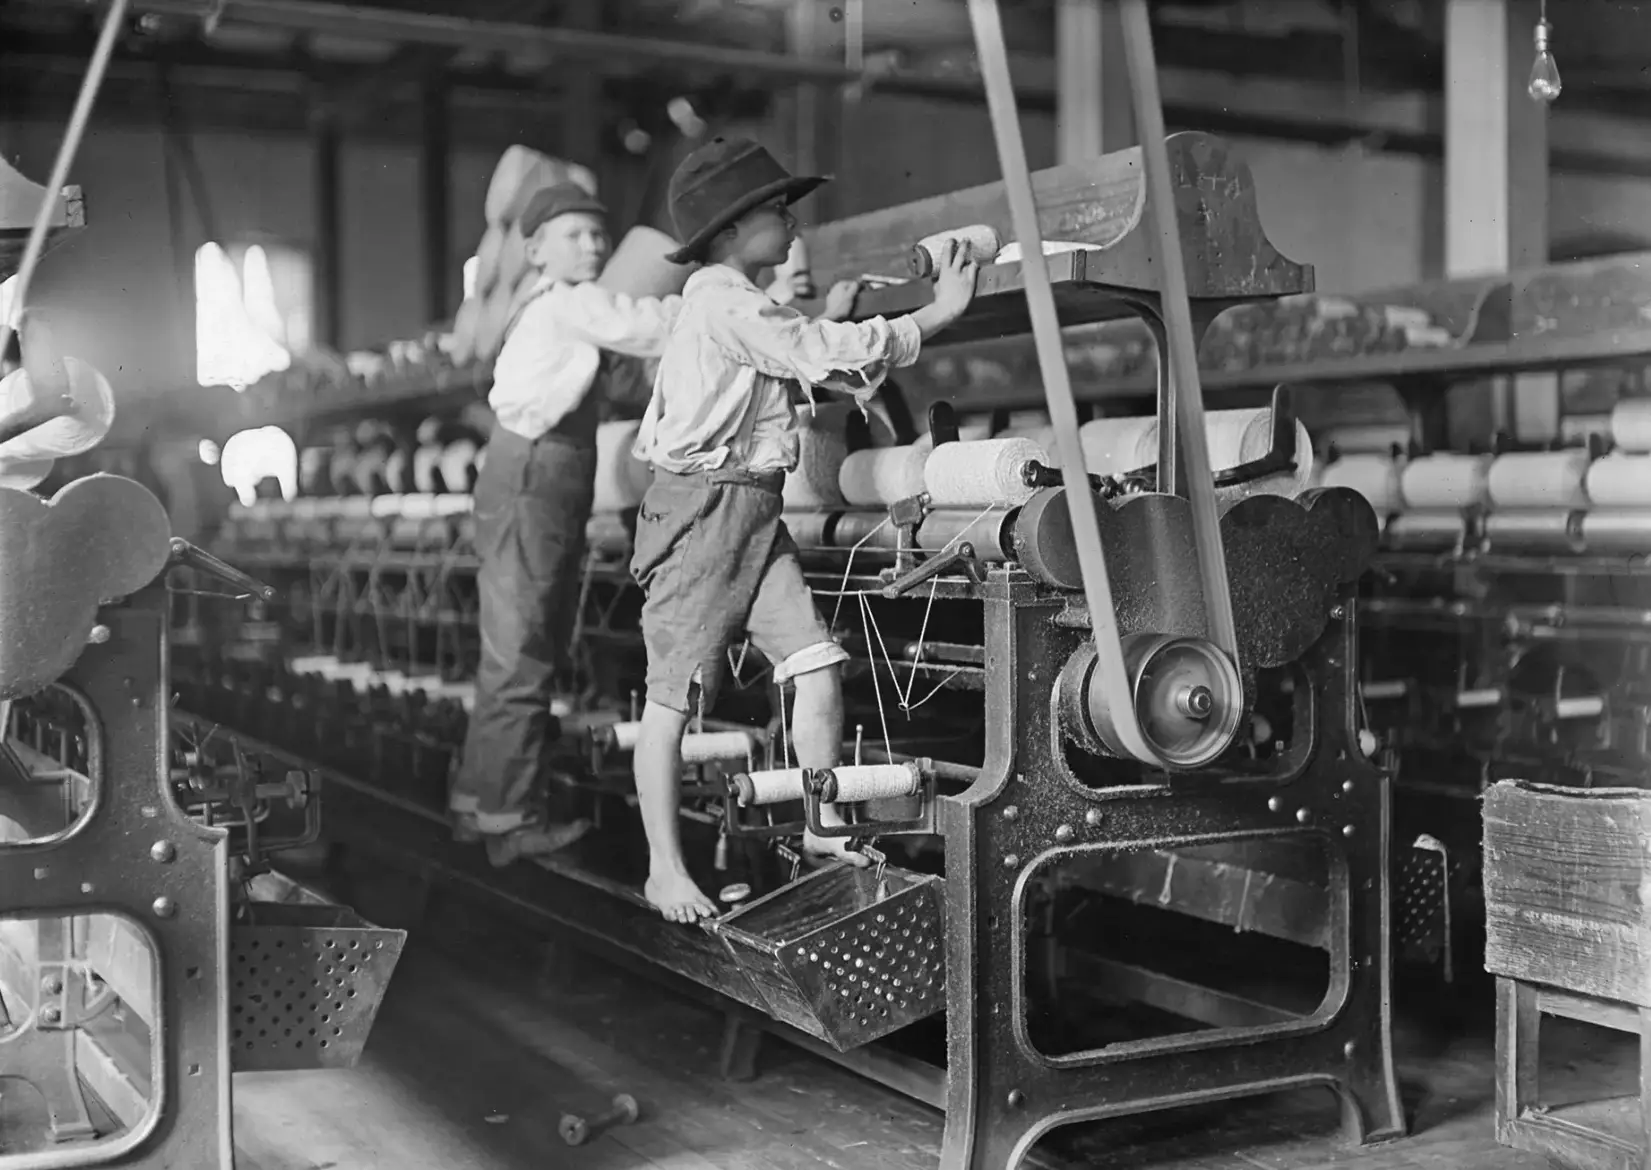 A large industrial textile machine, connected to a spinning belt, upon which stand two small, barefoot boys who are mending the machine.